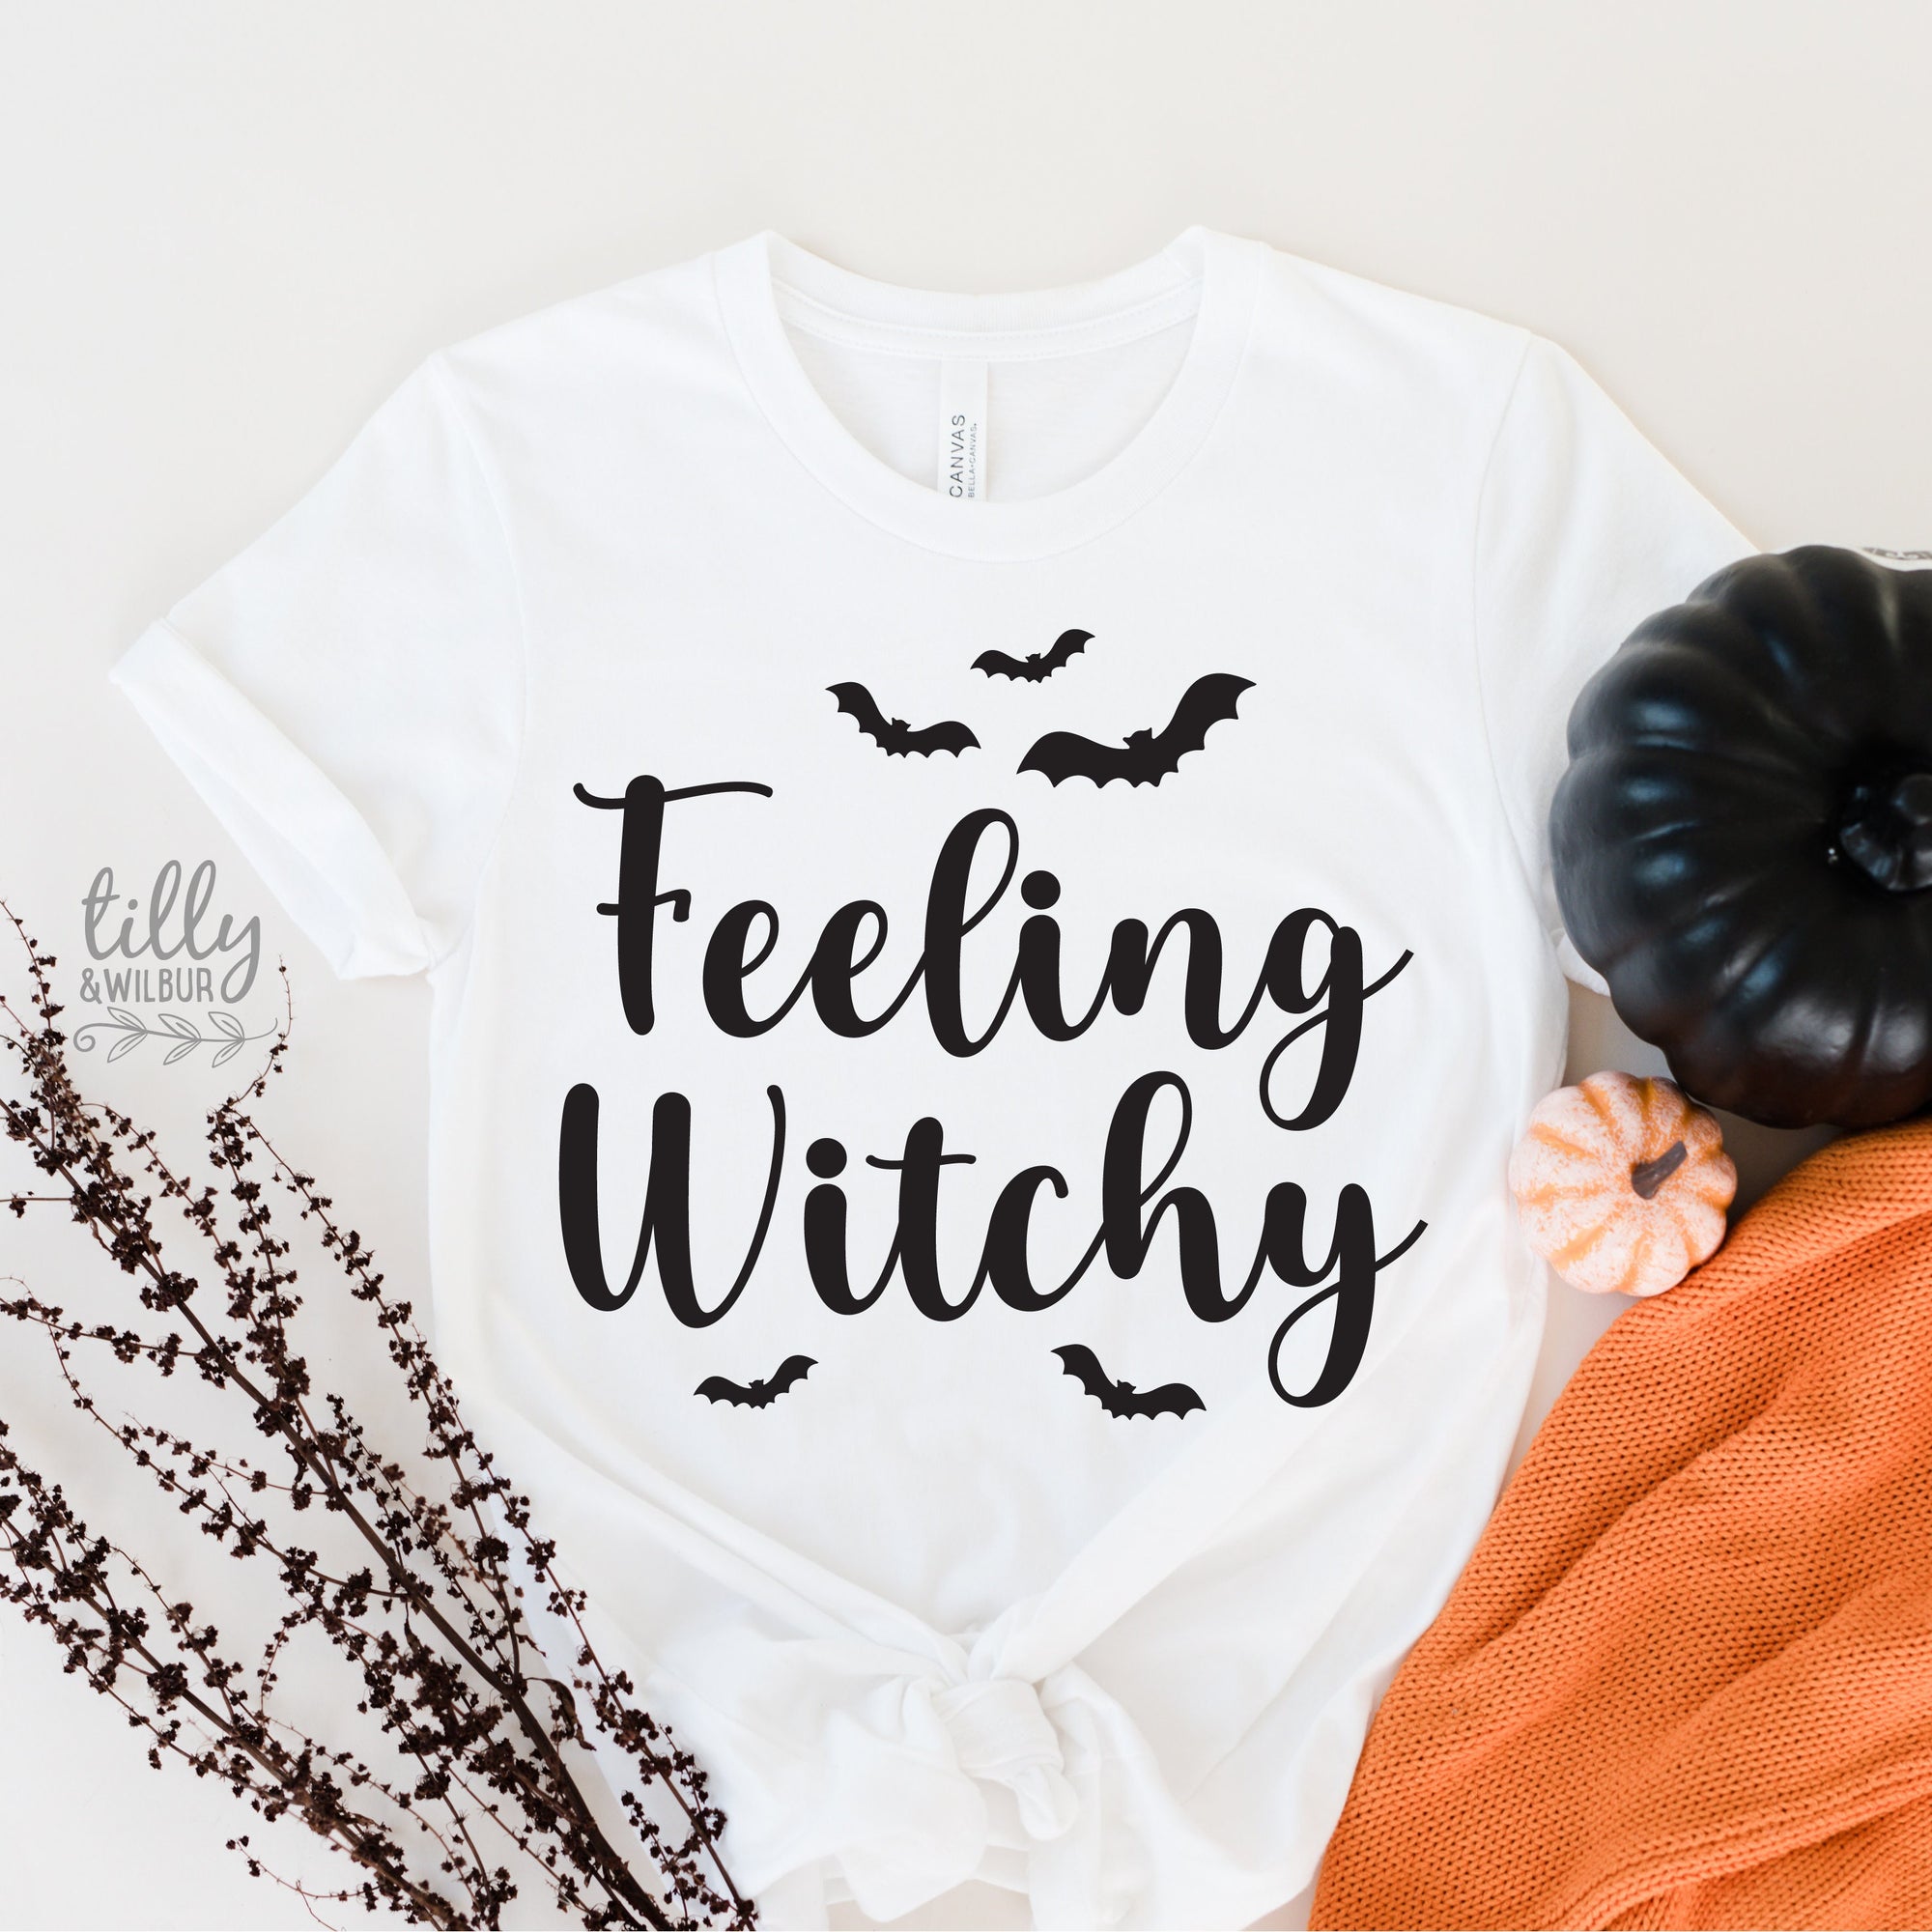 Feeling Witchy T-Shirt, Halloween T-Shirt, Witch Halloween Tee, Halloween Tee For Women, Ladies Halloween Shirt, Trick Or Treat, Costume Tee